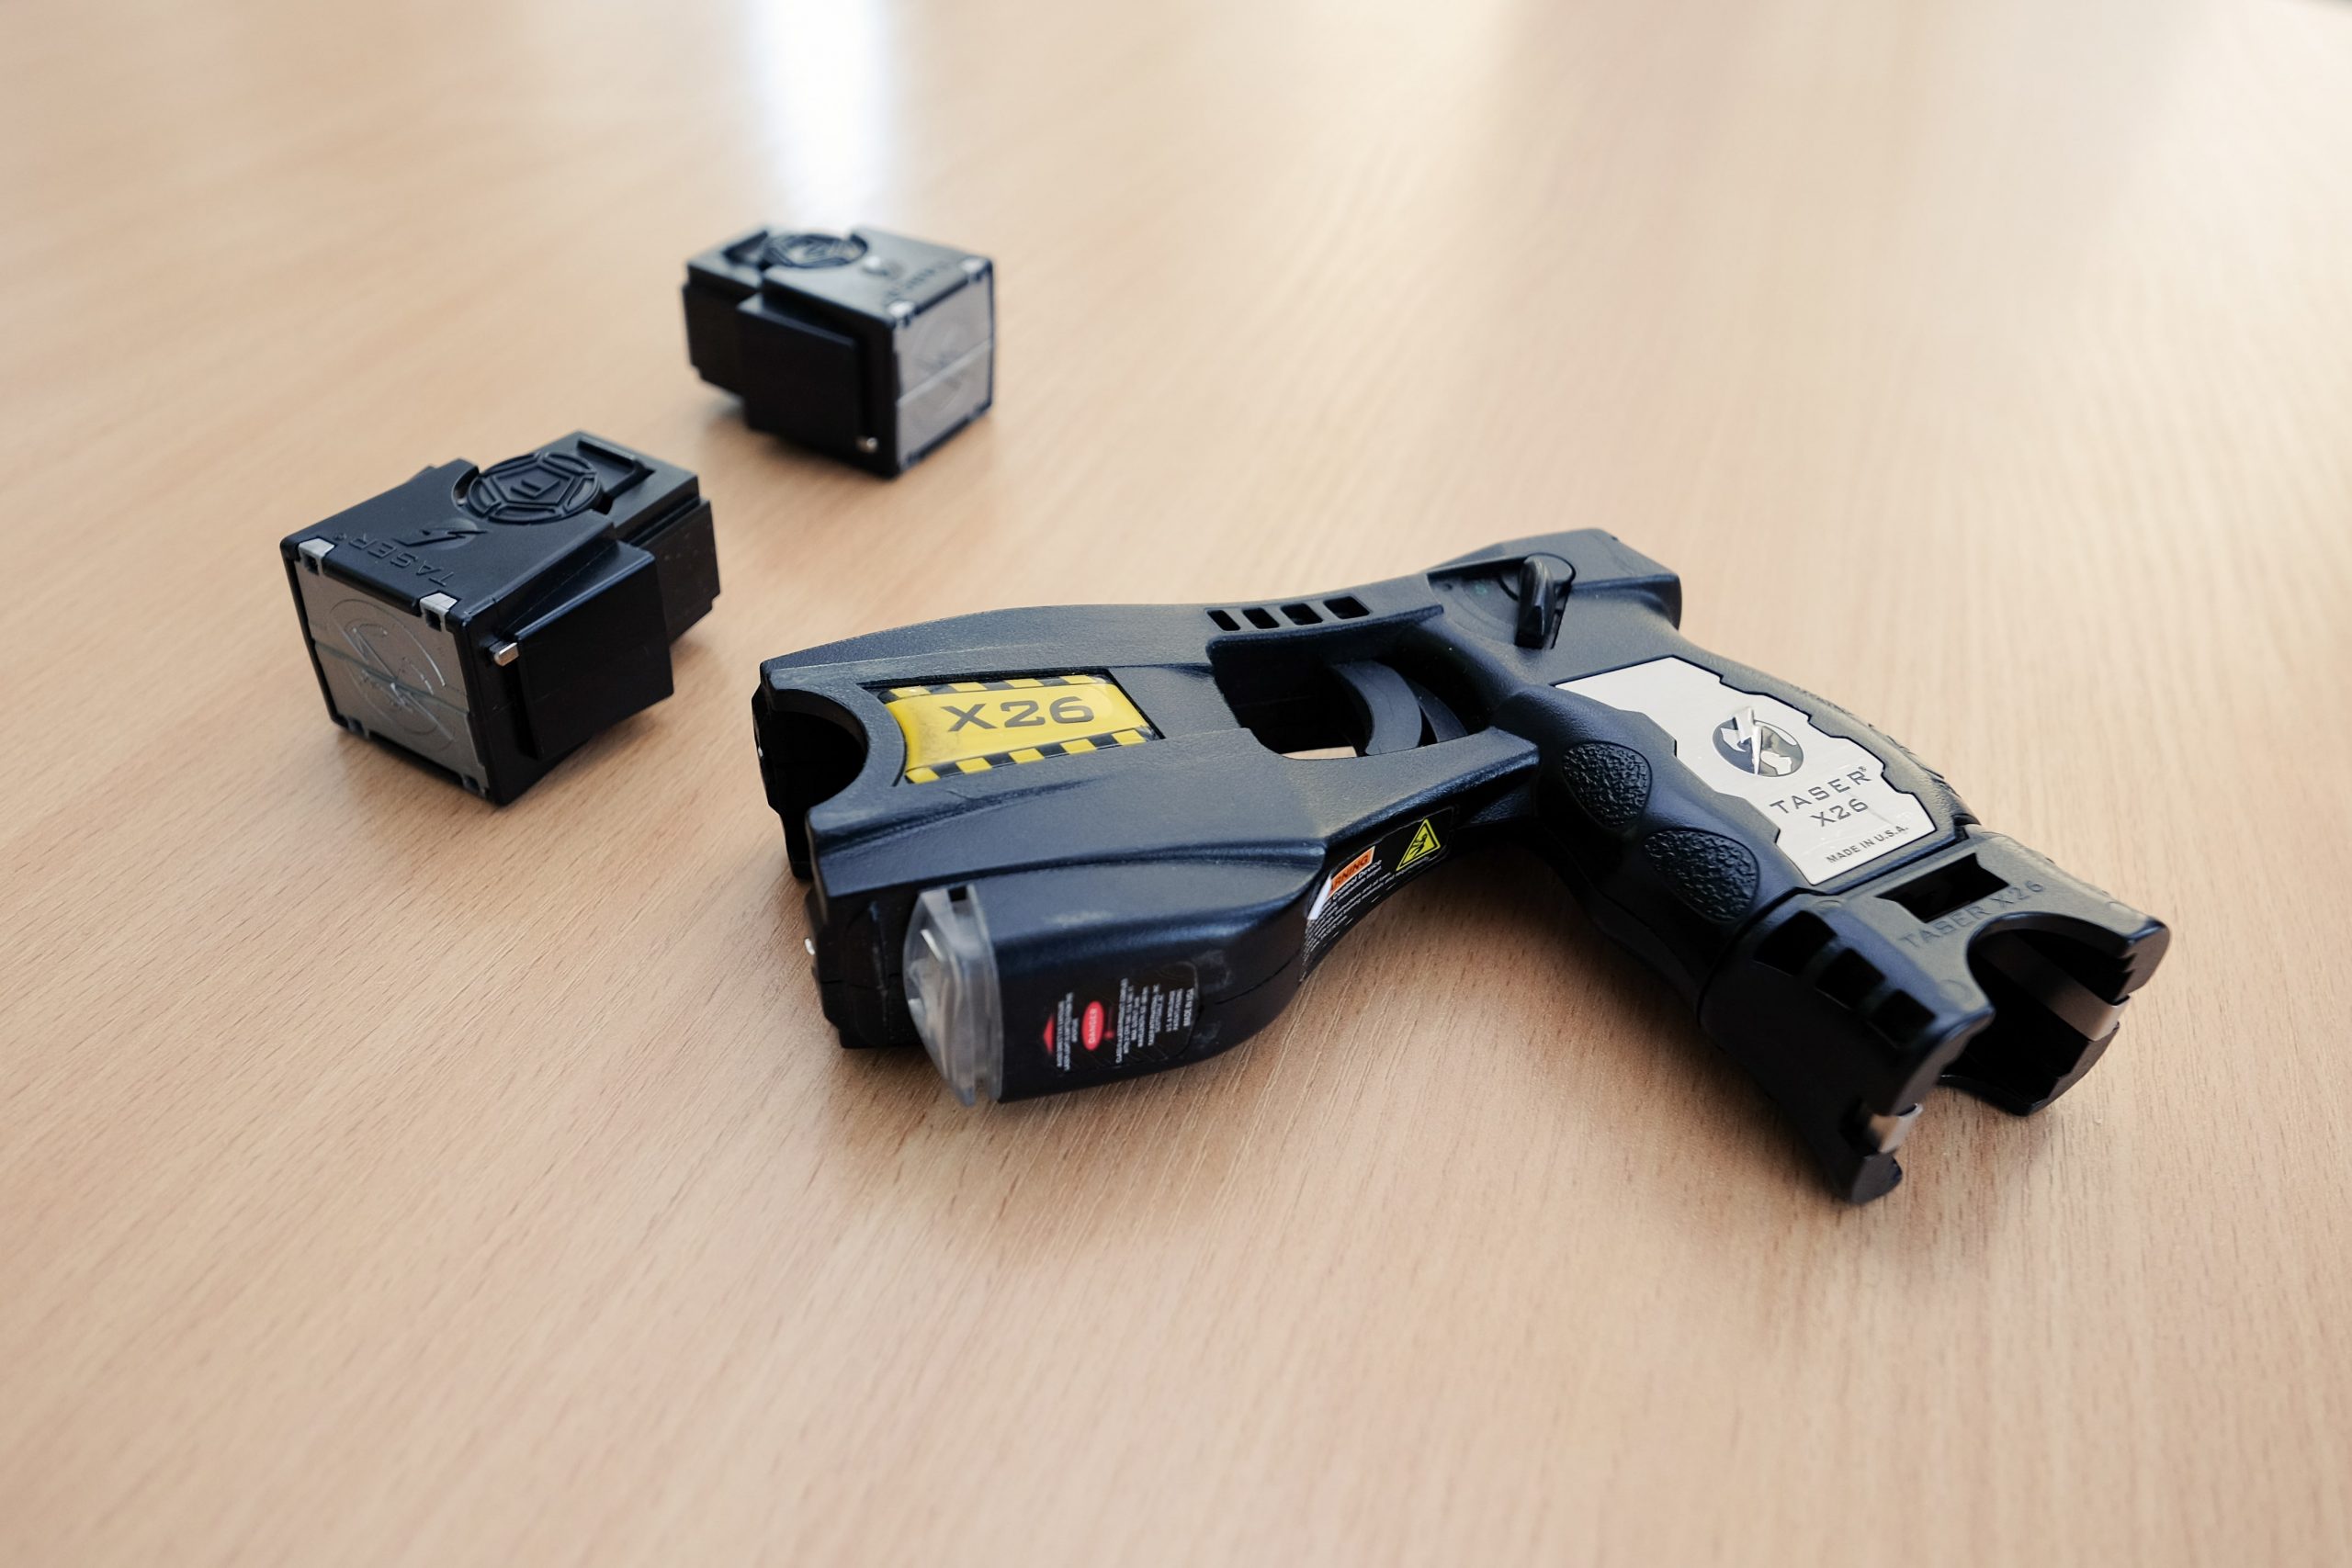 When Can NSW Police Use Tasers?